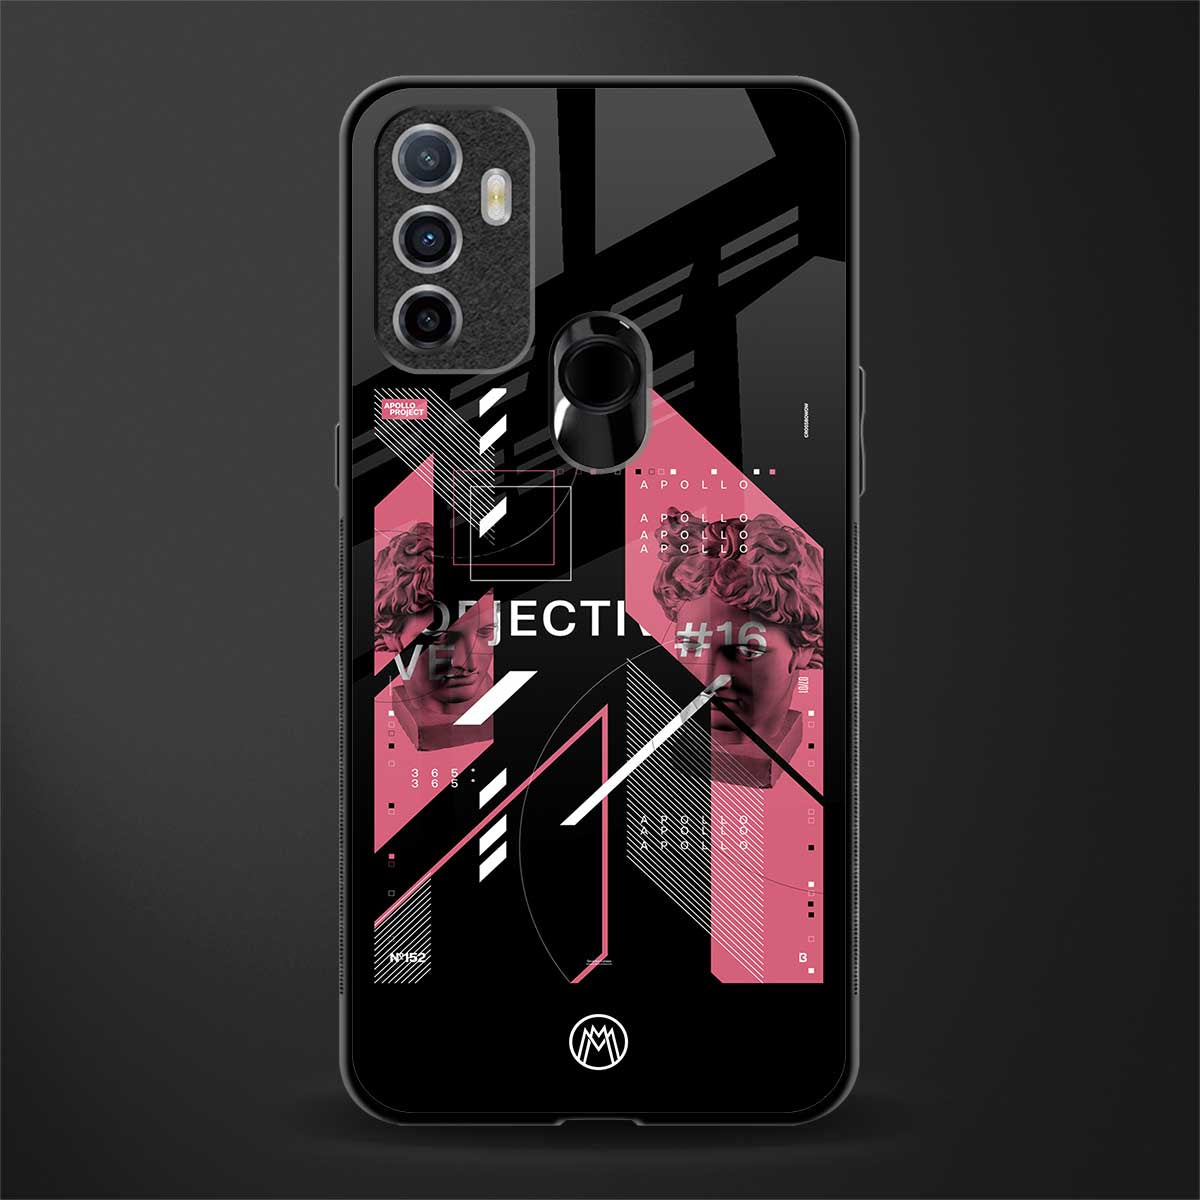 apollo project aesthetic pink and black glass case for oppo a53 image